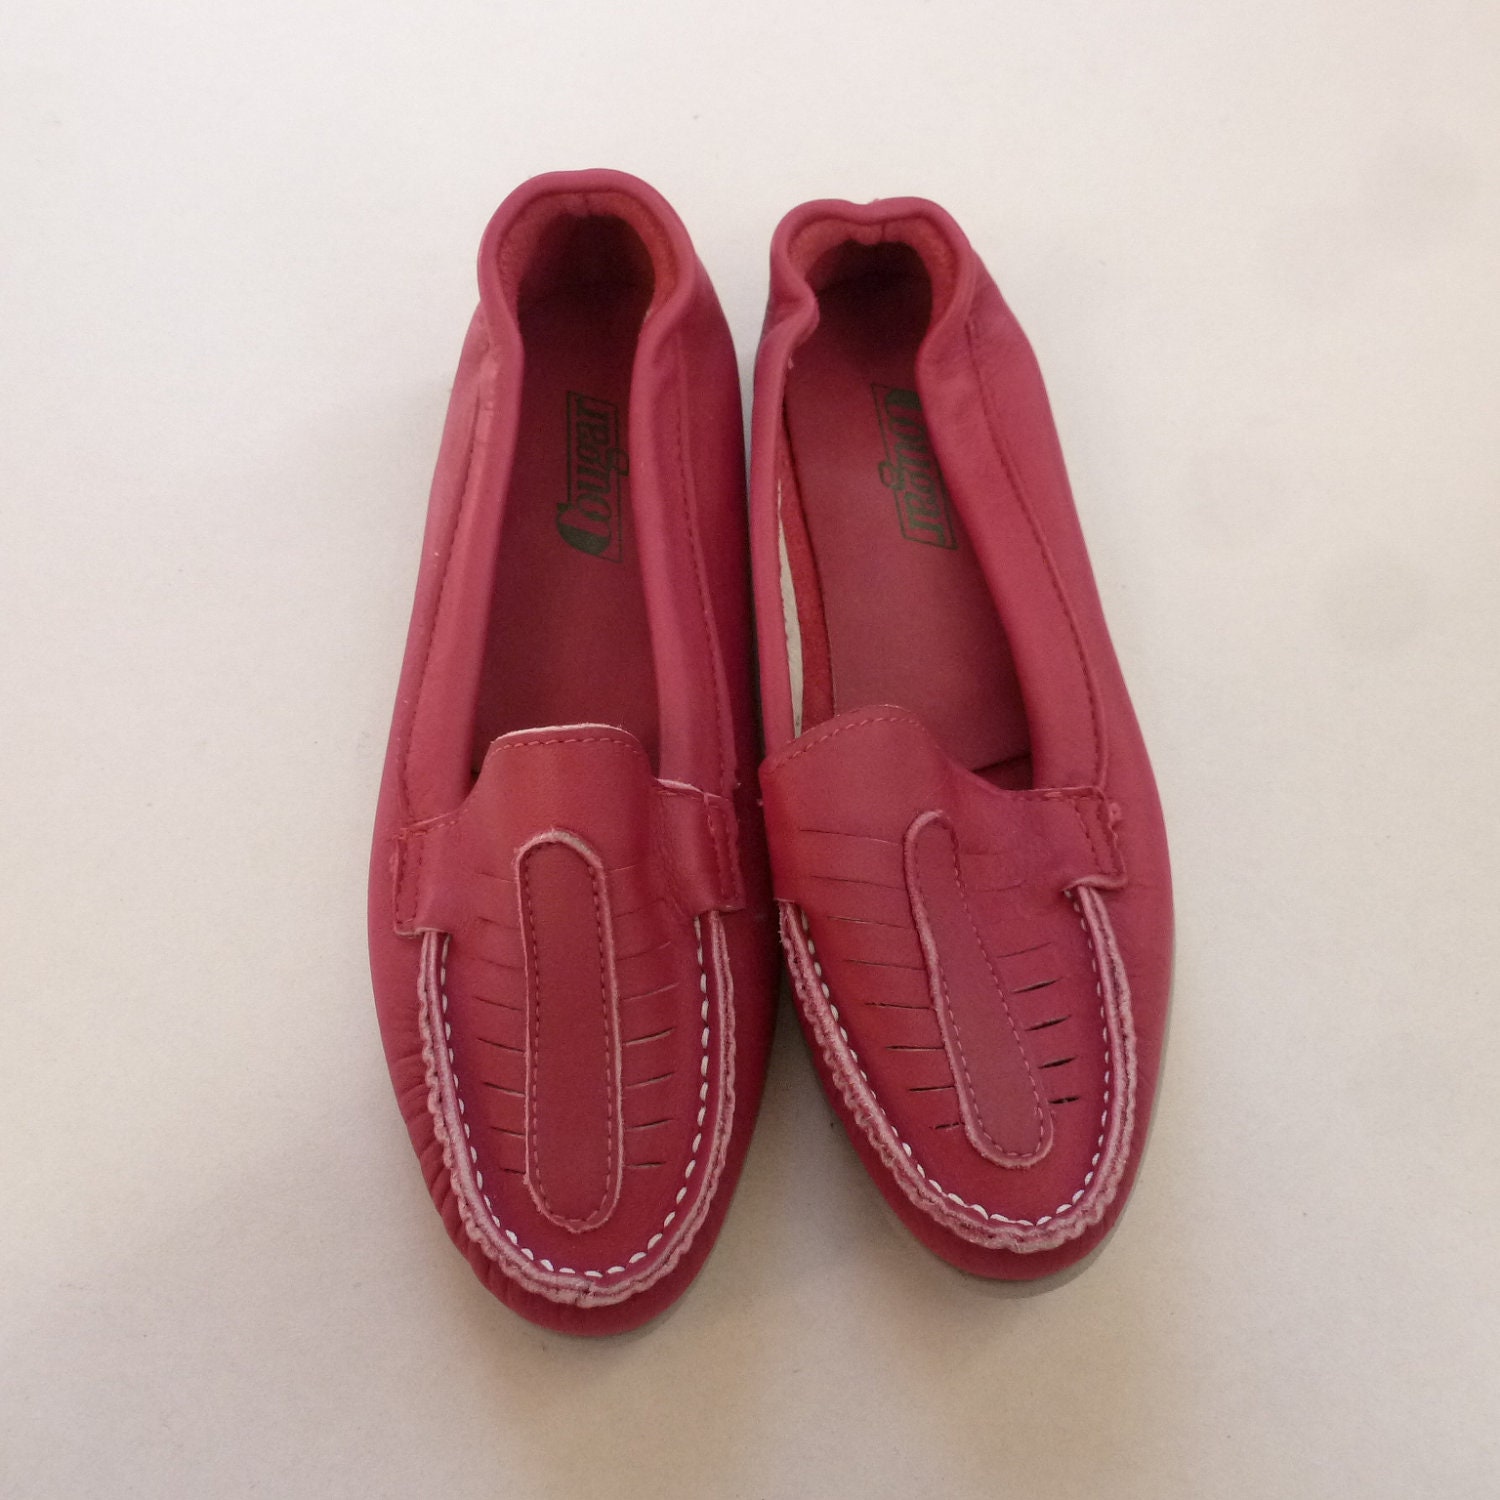 Pink Leather Loafers -Womens Preppy Leather Moccasin Style Loafers ...